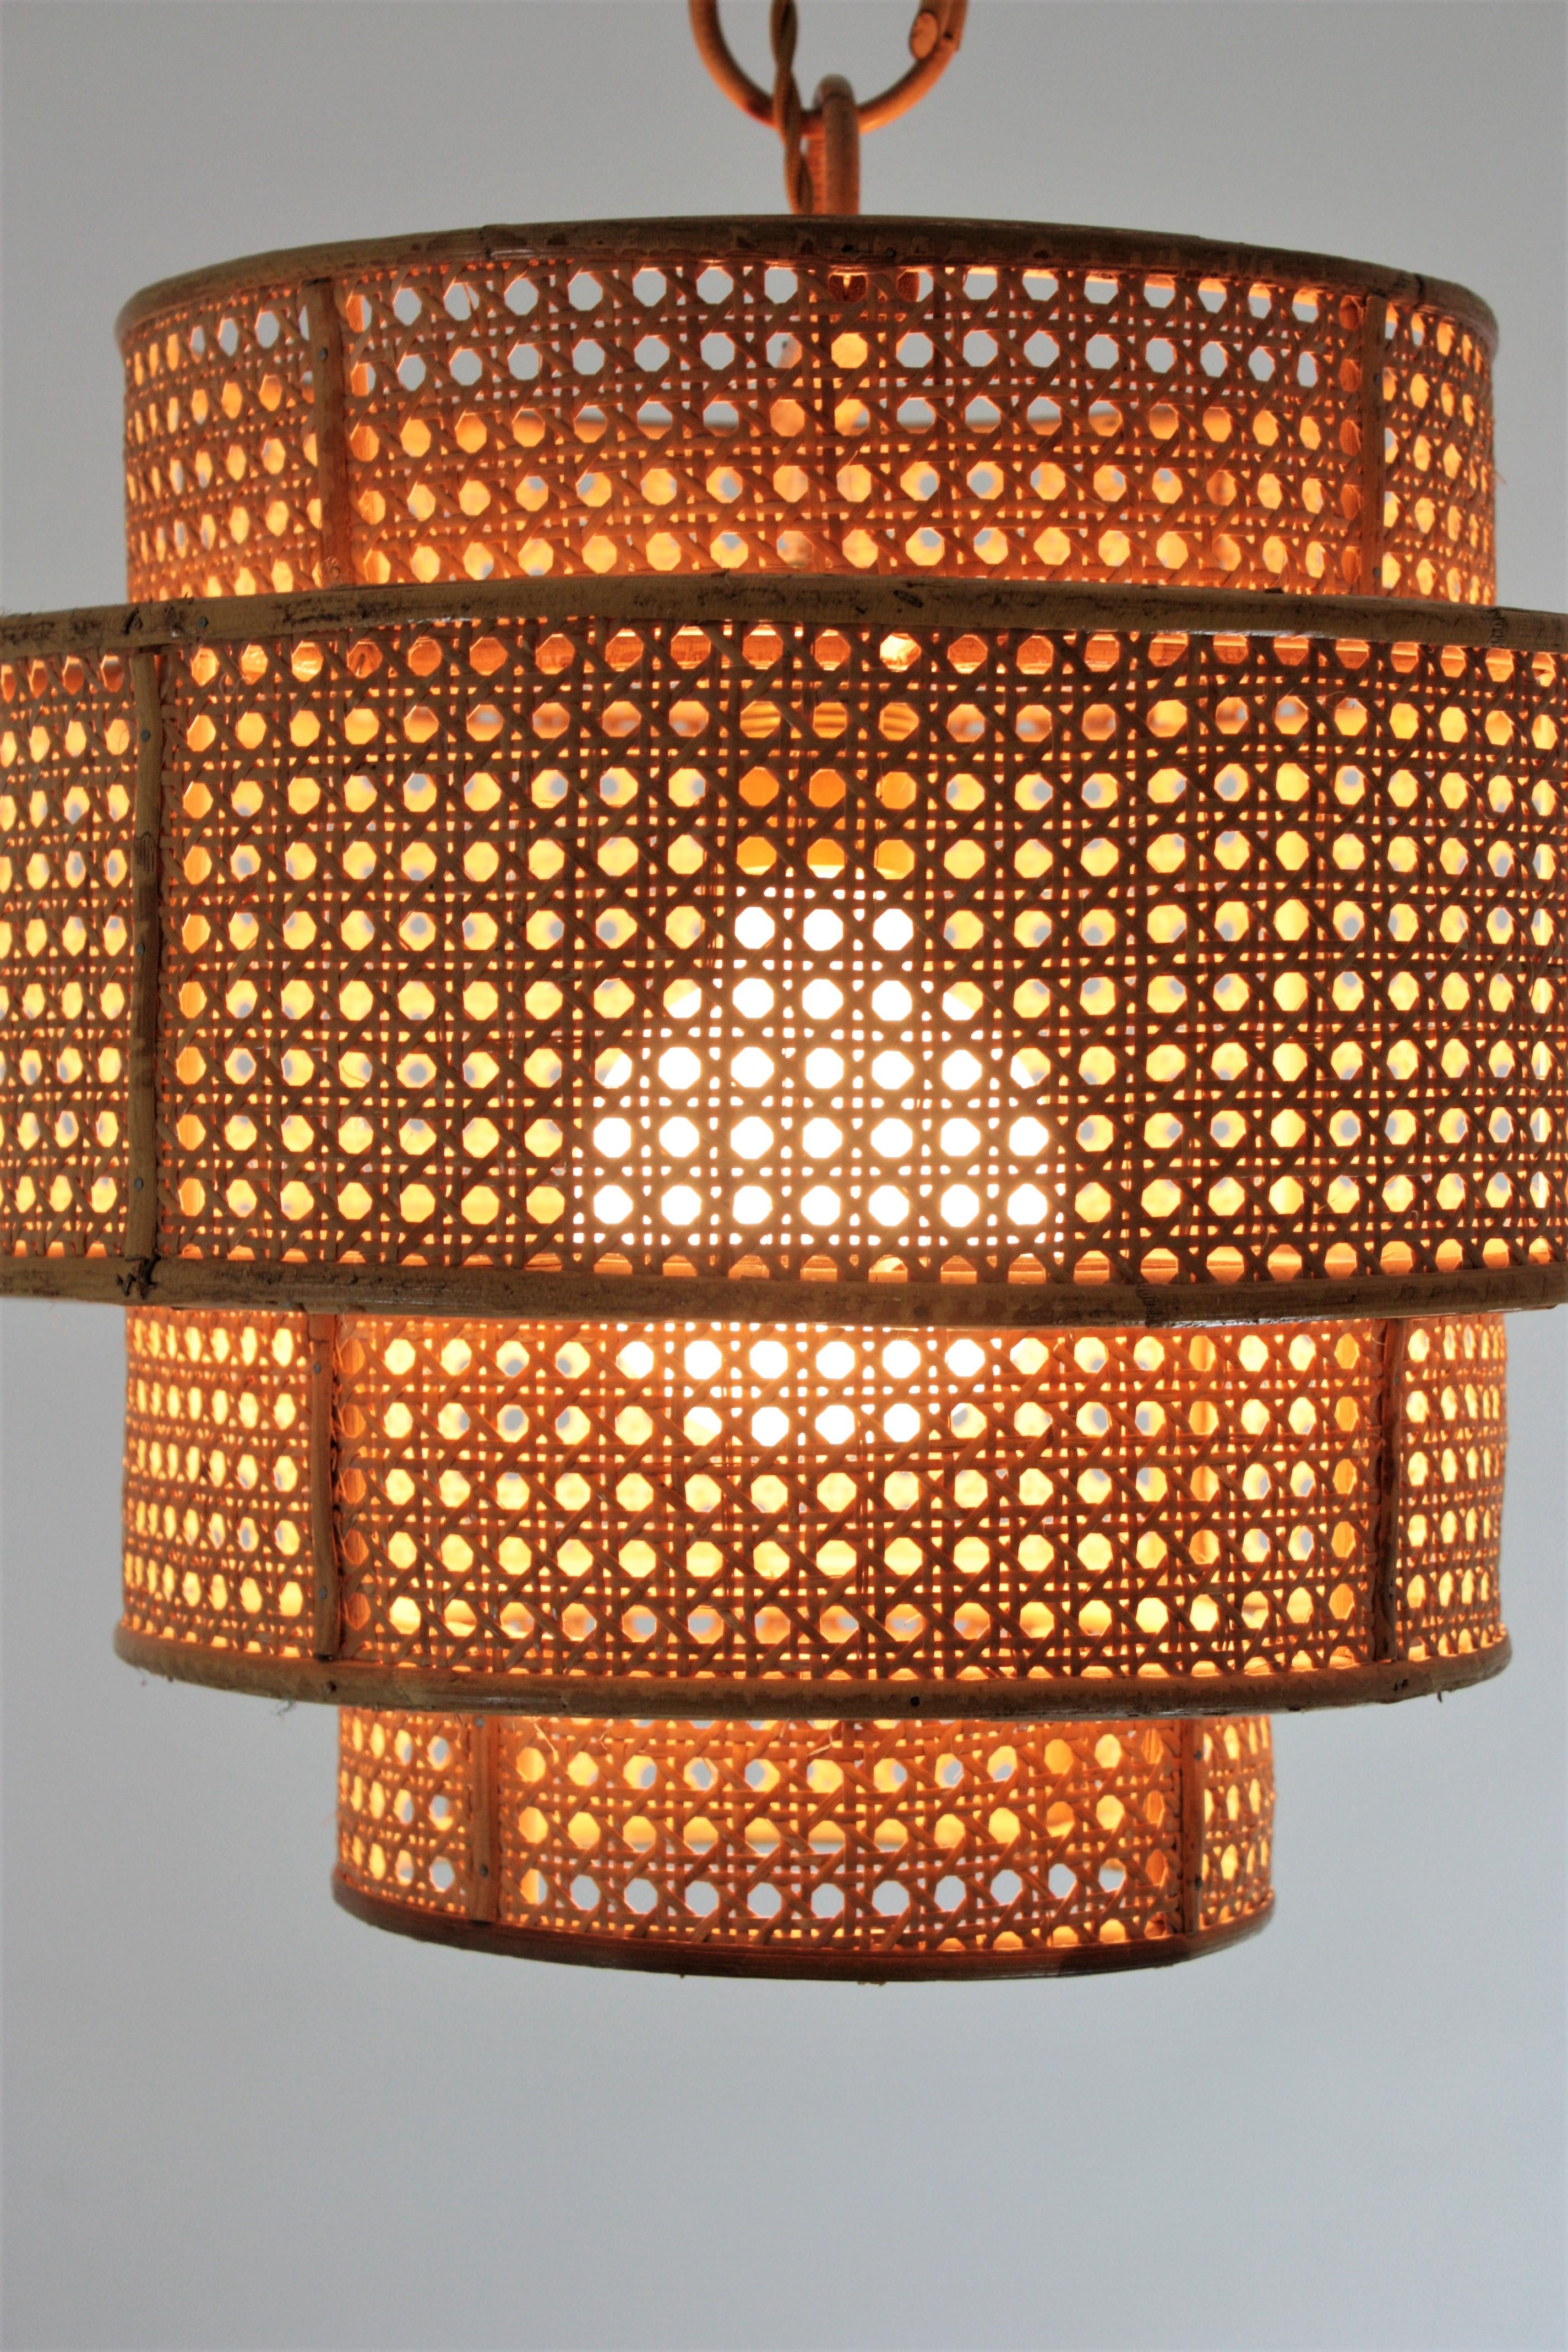  Rattan Wicker Weave Concentric Cylinder Pendant Hanging Light, 1960s For Sale 4